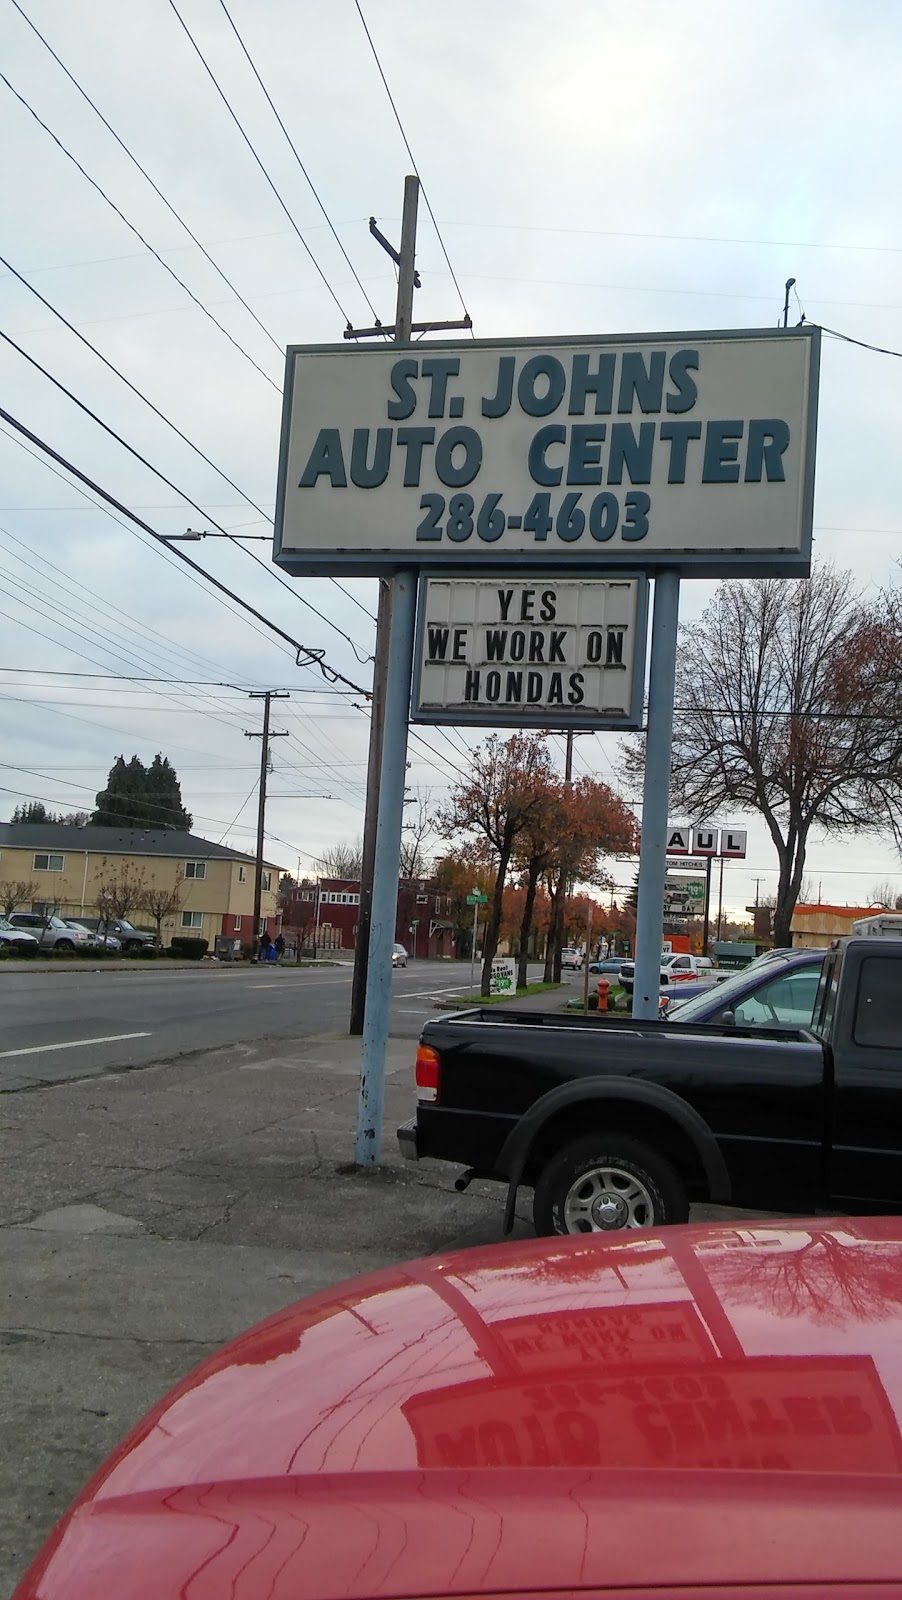 St Johns Auto Center | 6514 N Lombard St, Portland, OR 97203 | Phone: (503) 286-4603